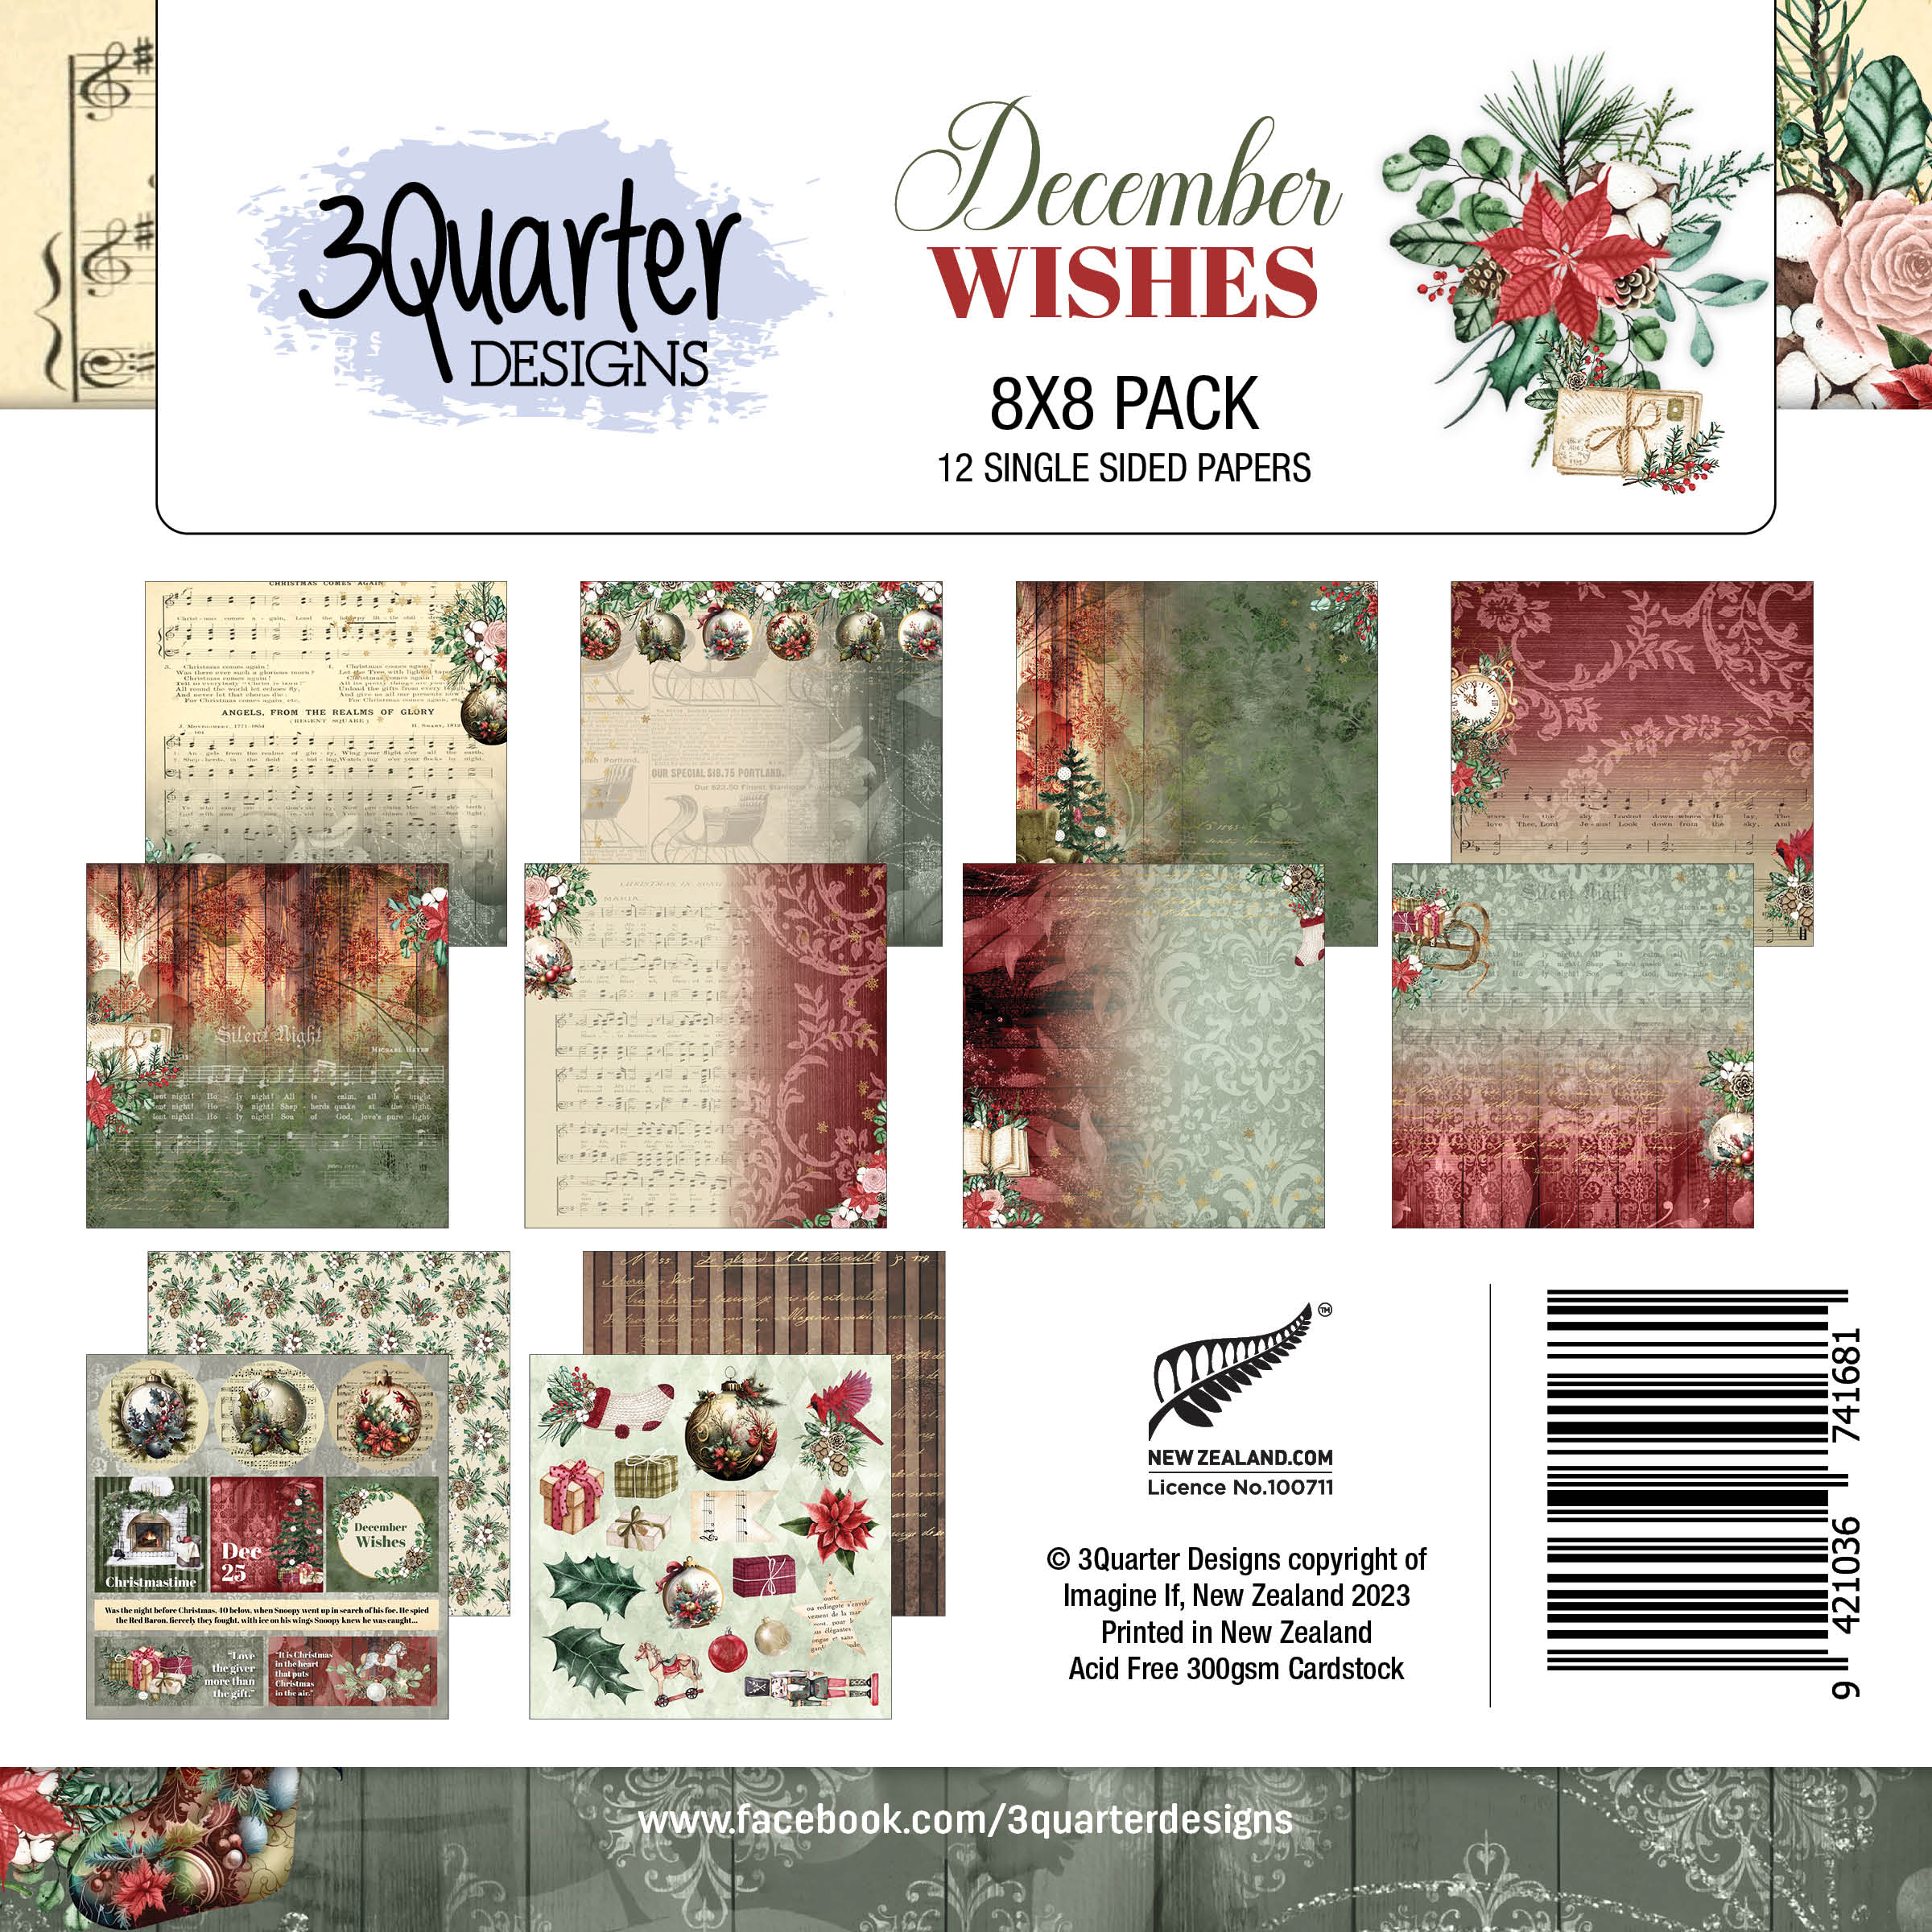 December Wishes 8x8 Pack